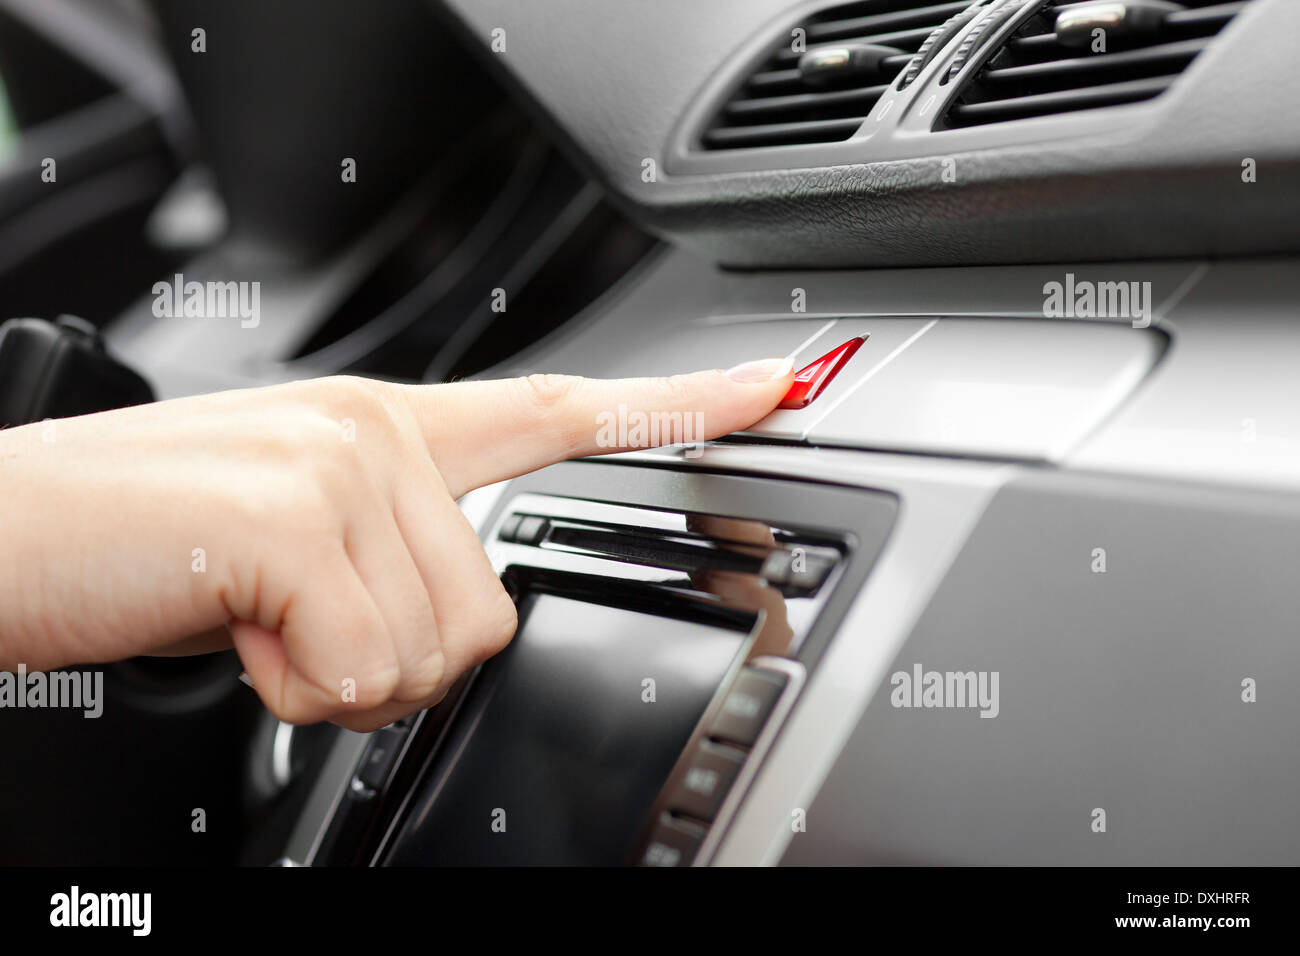 hand pressing Car emergency lights button on dashboard Stock Photo